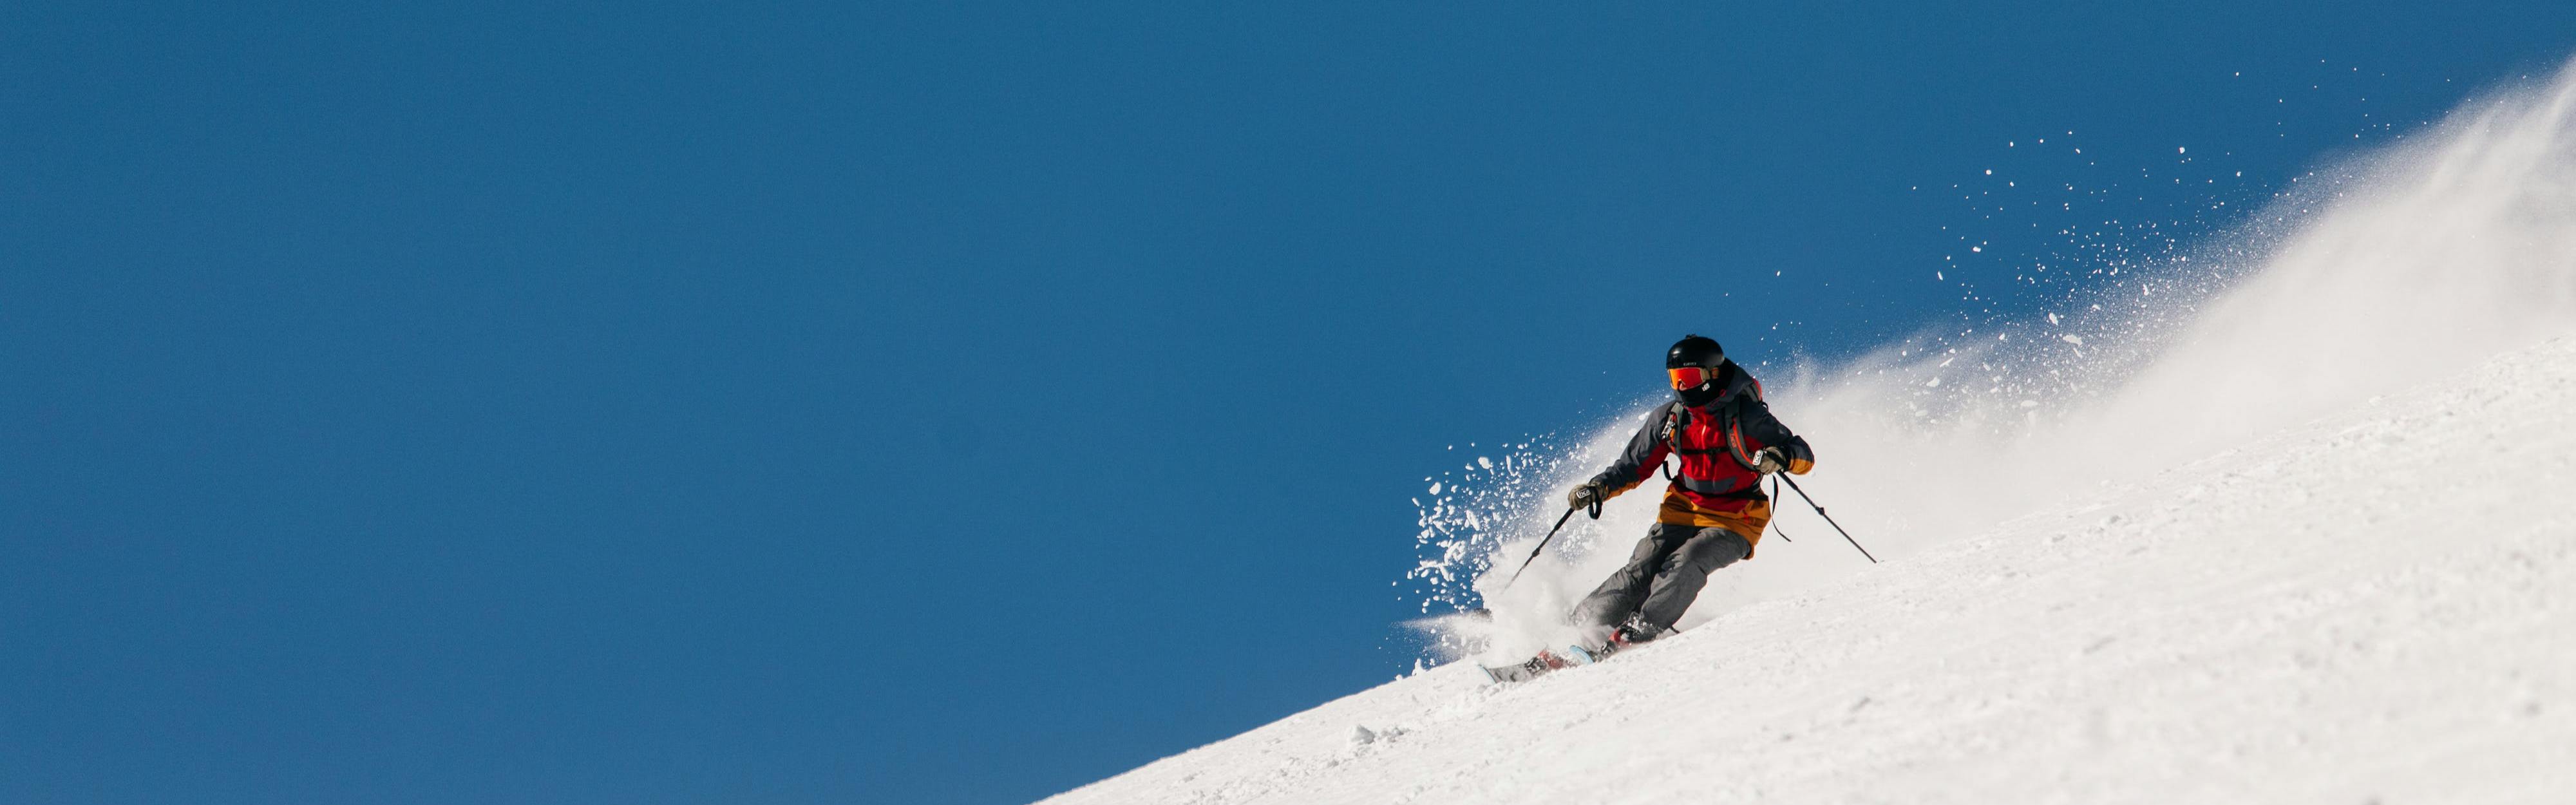 A skier wearing a red jacket skis down a hill.